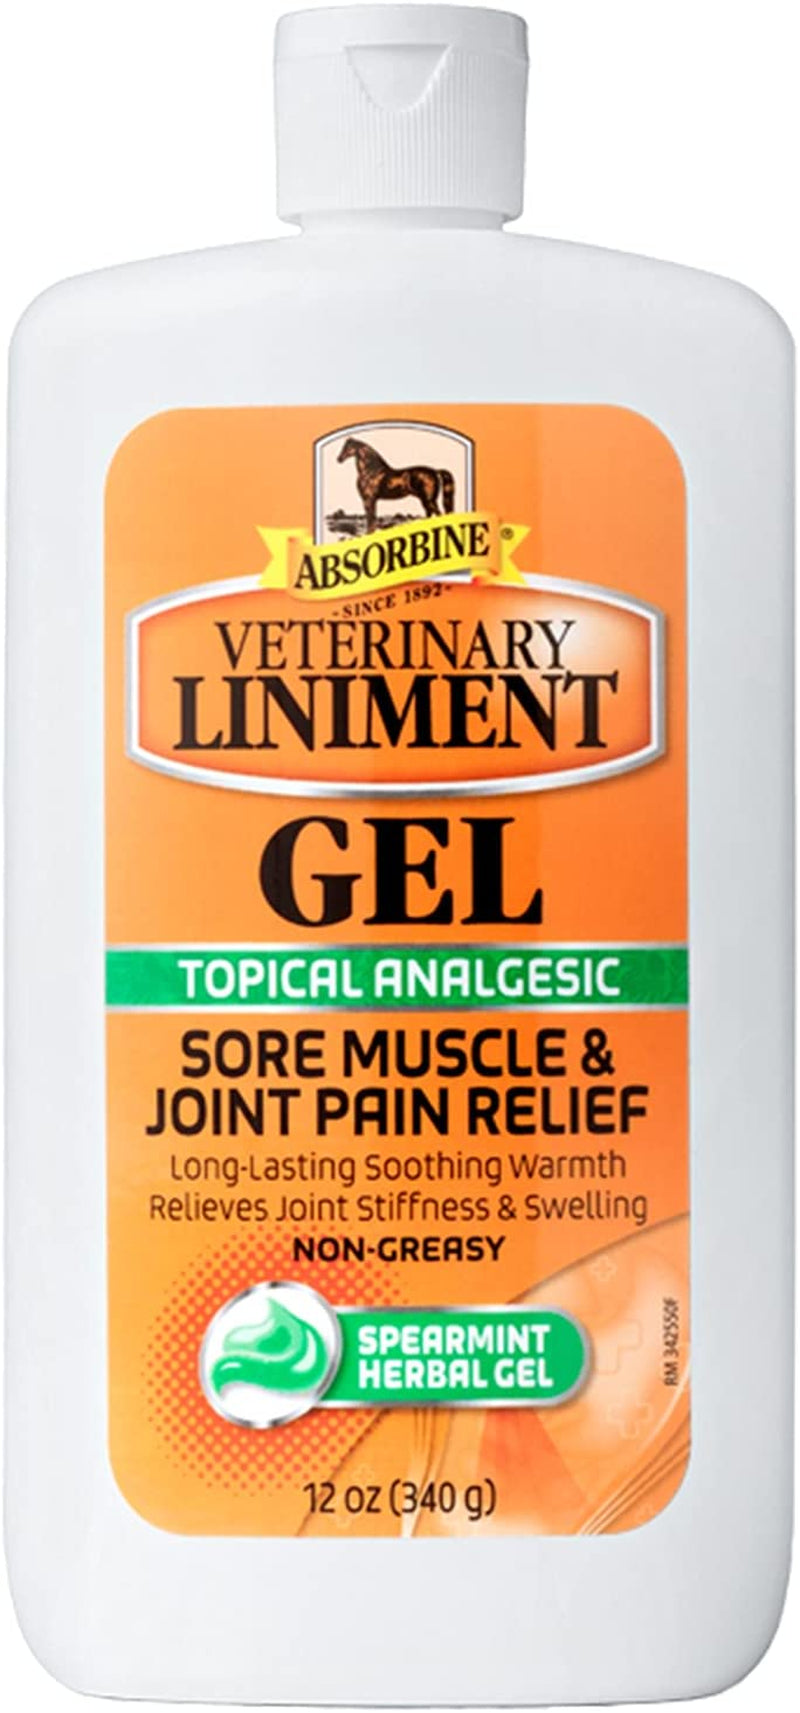 Veterinary Liniment Topical Analgesic Sore Muscle and Arthritis Pain Relief Warming Liniment Rub, 12 Ounce Gel